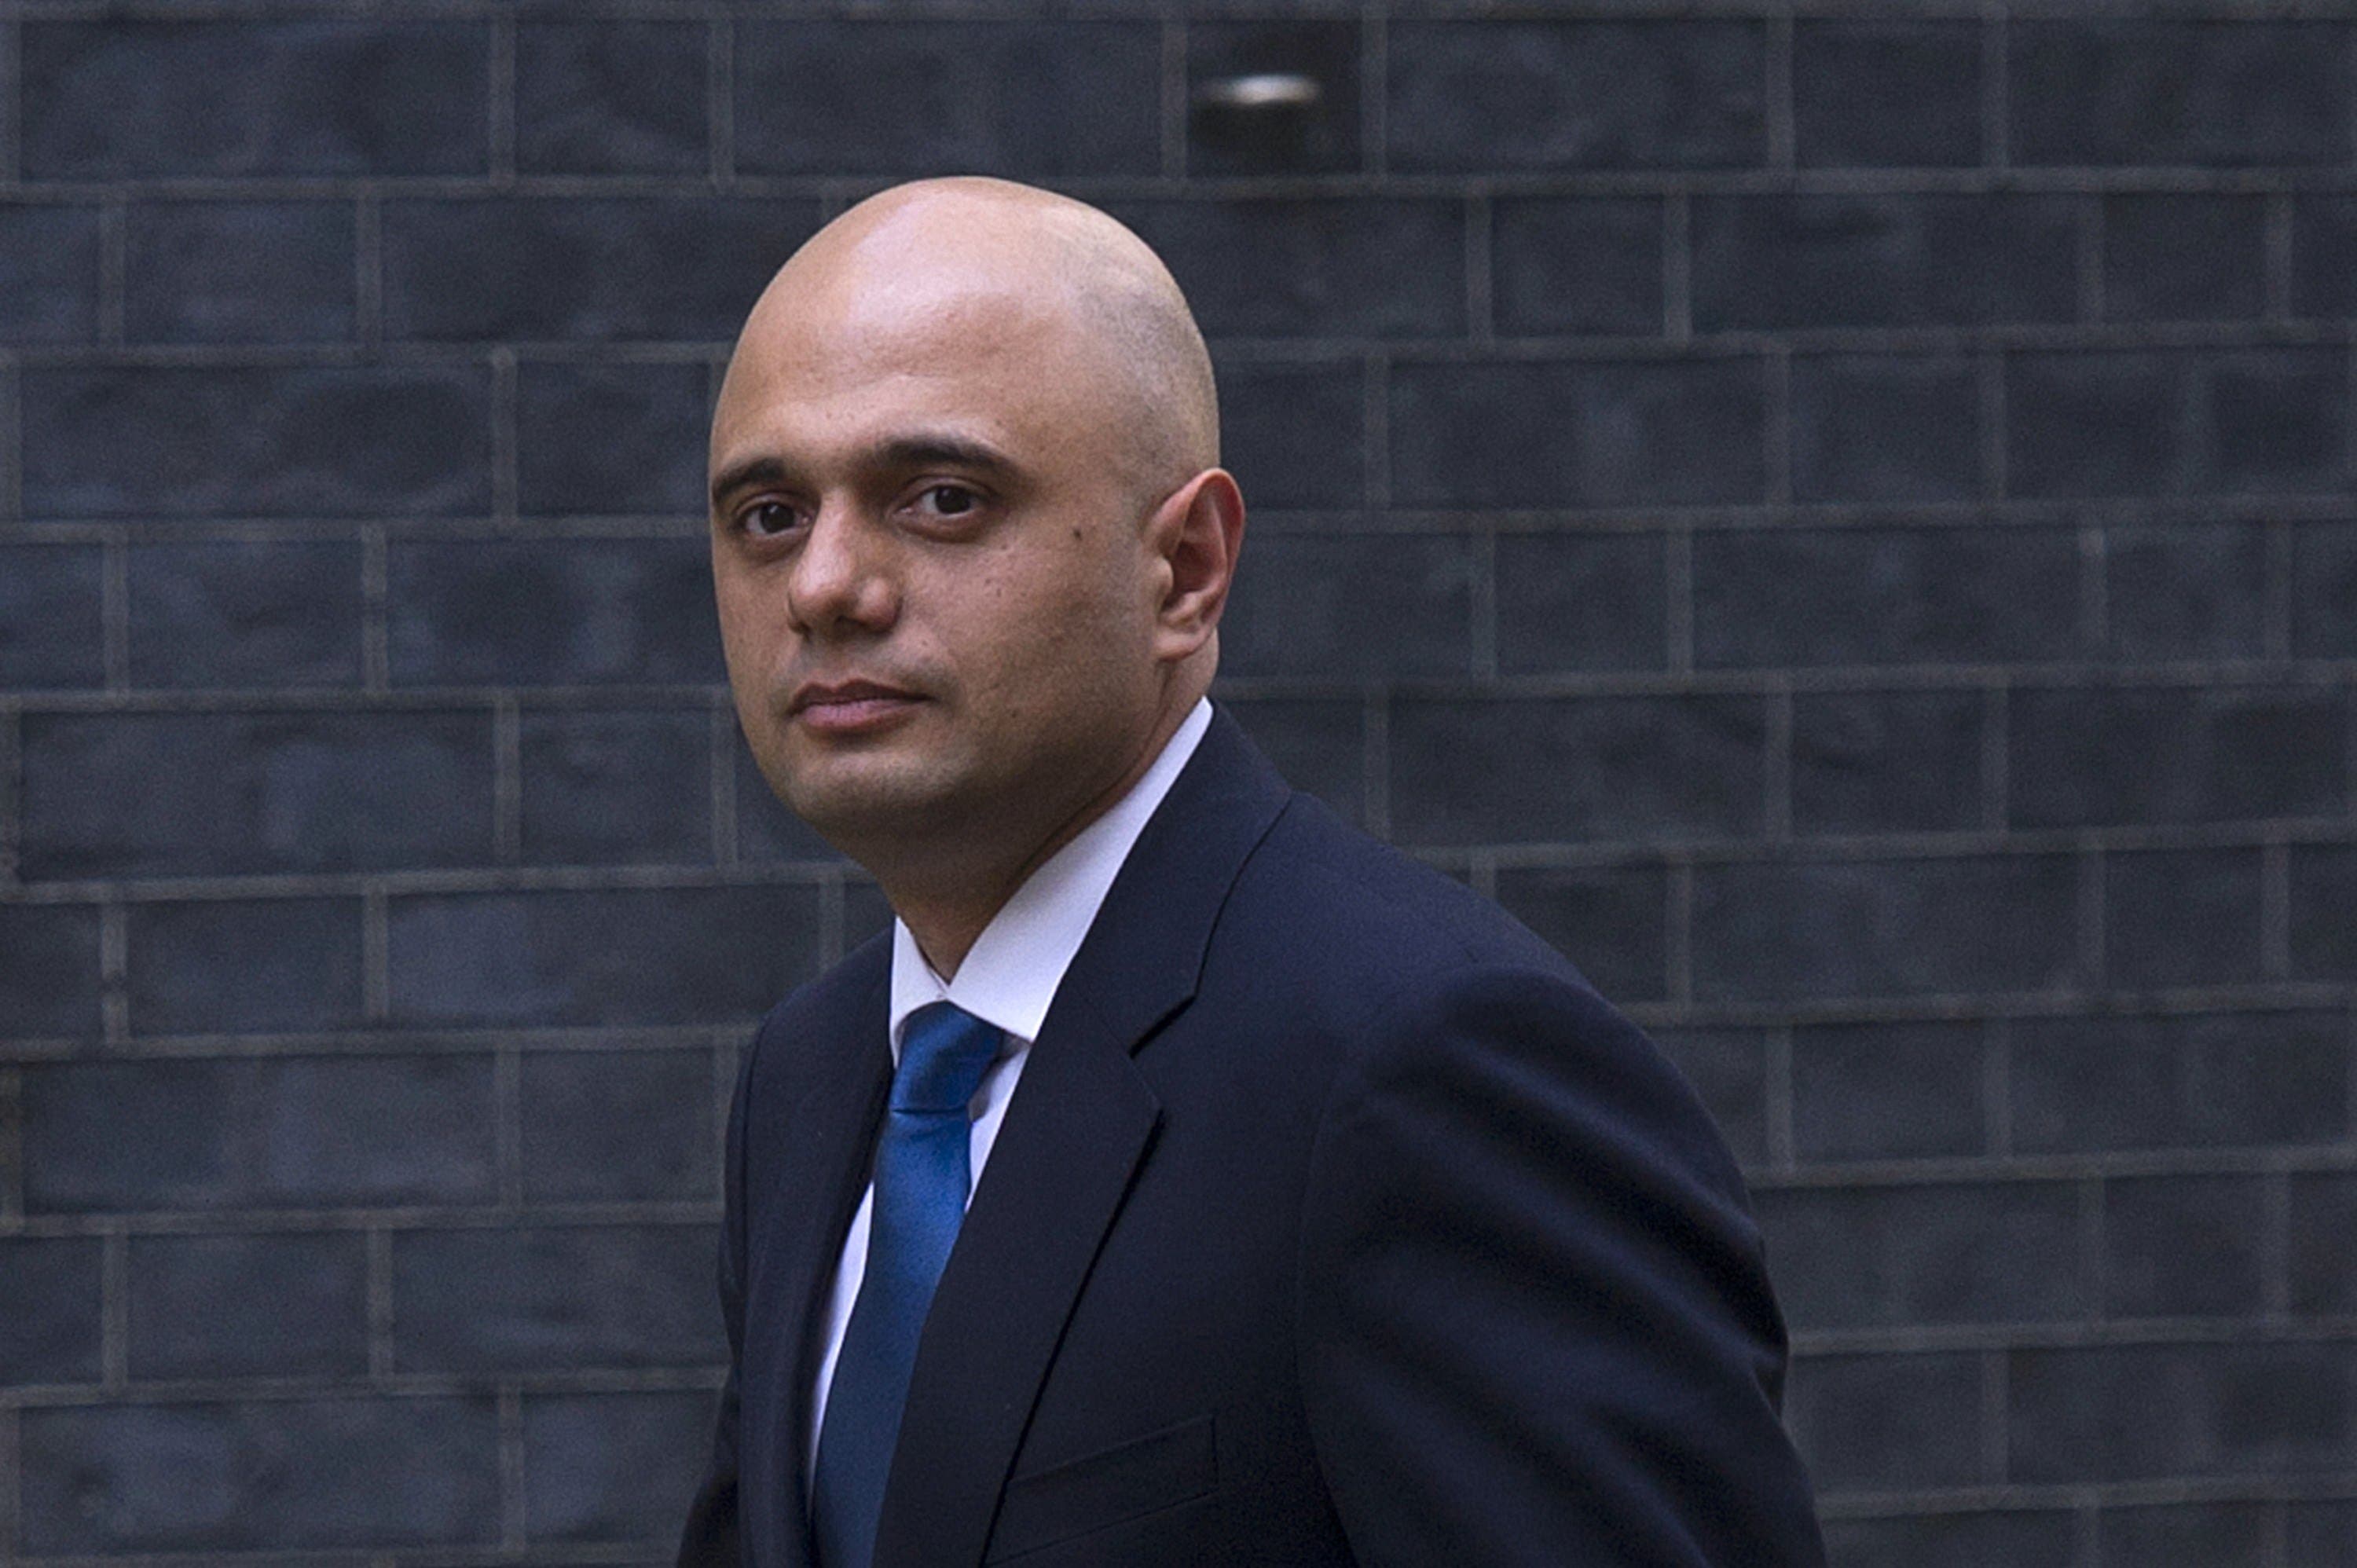 Sajid Javid, arrives in Downing Street in central London on April 9, 2014 after being appointed to replace Maria Miller as British Culture Secretary. (AFP)